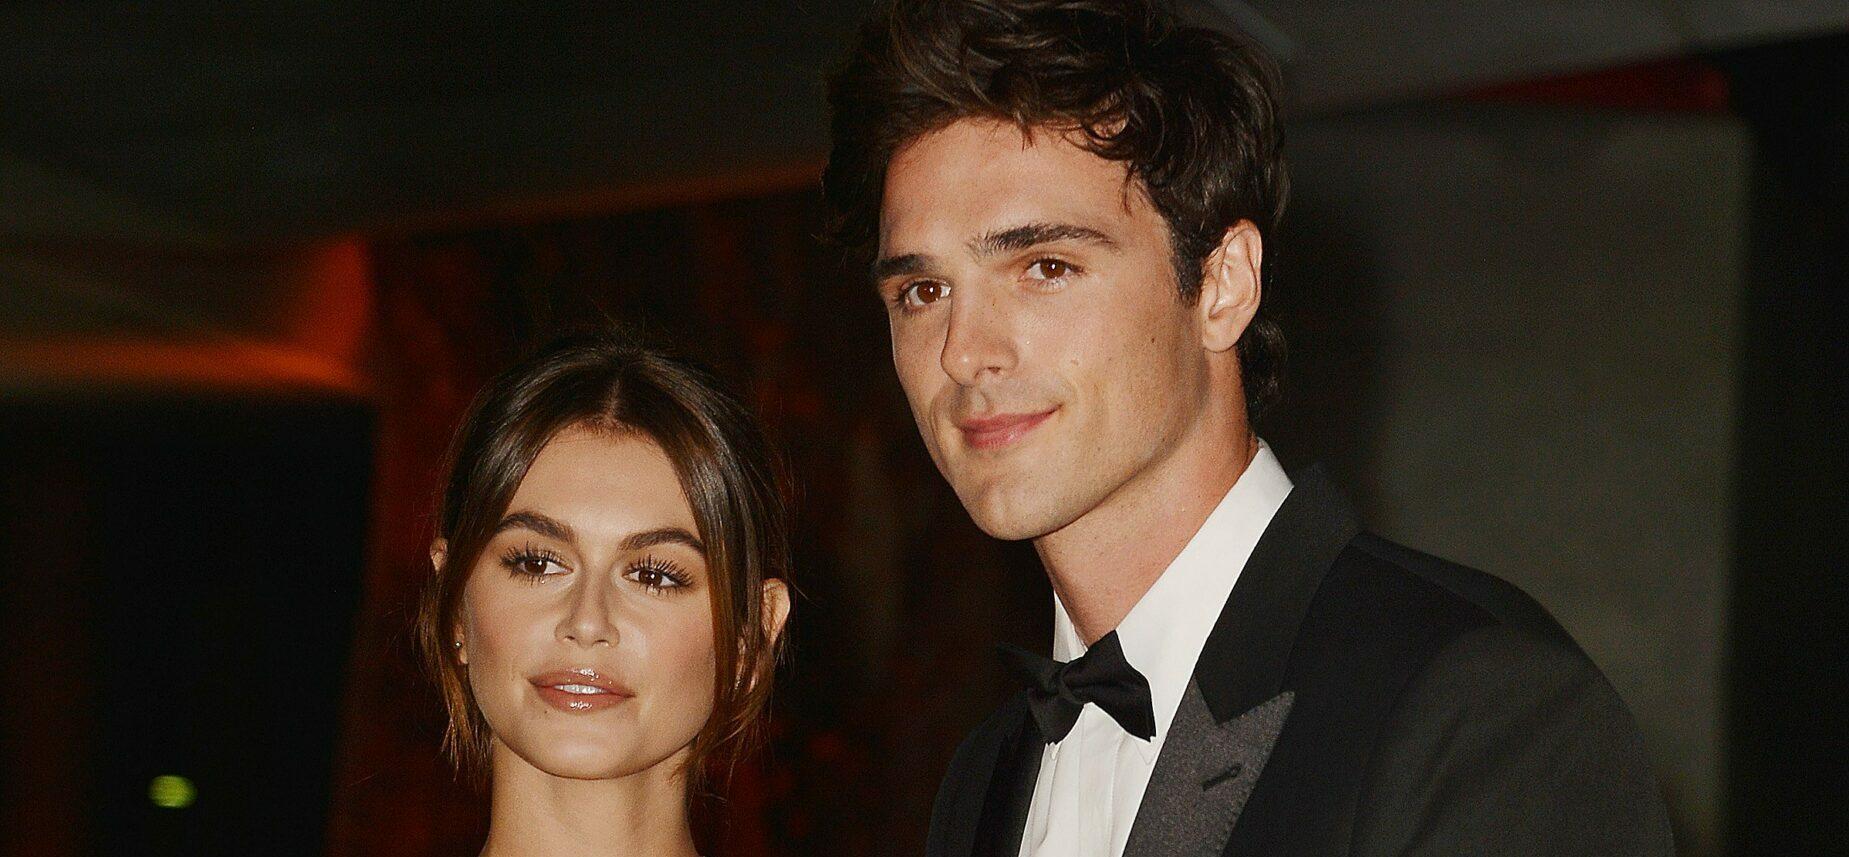 Jacob Elordi Speaks About Kaia Gerber For The First Time Since Breakup!